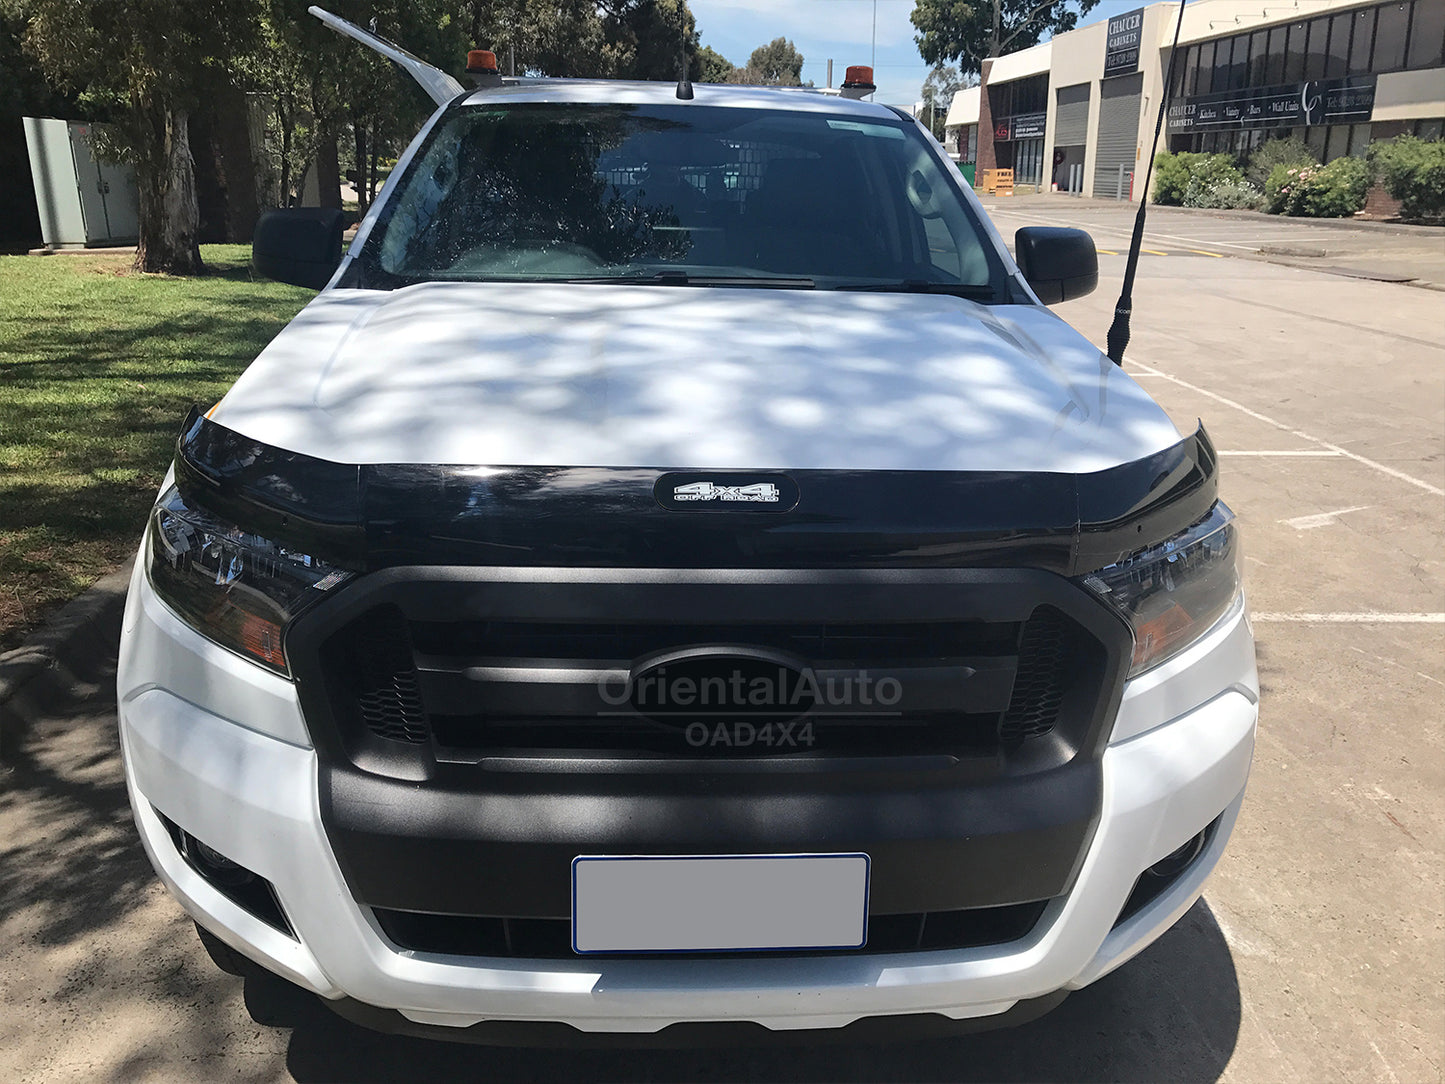 Injection Bonnet Protector & Premium Weathershield for Ford Ranger Single/Extra Cab 2016-2022 Weather Shields Window Visor + Hood Protector Bonnet Guard